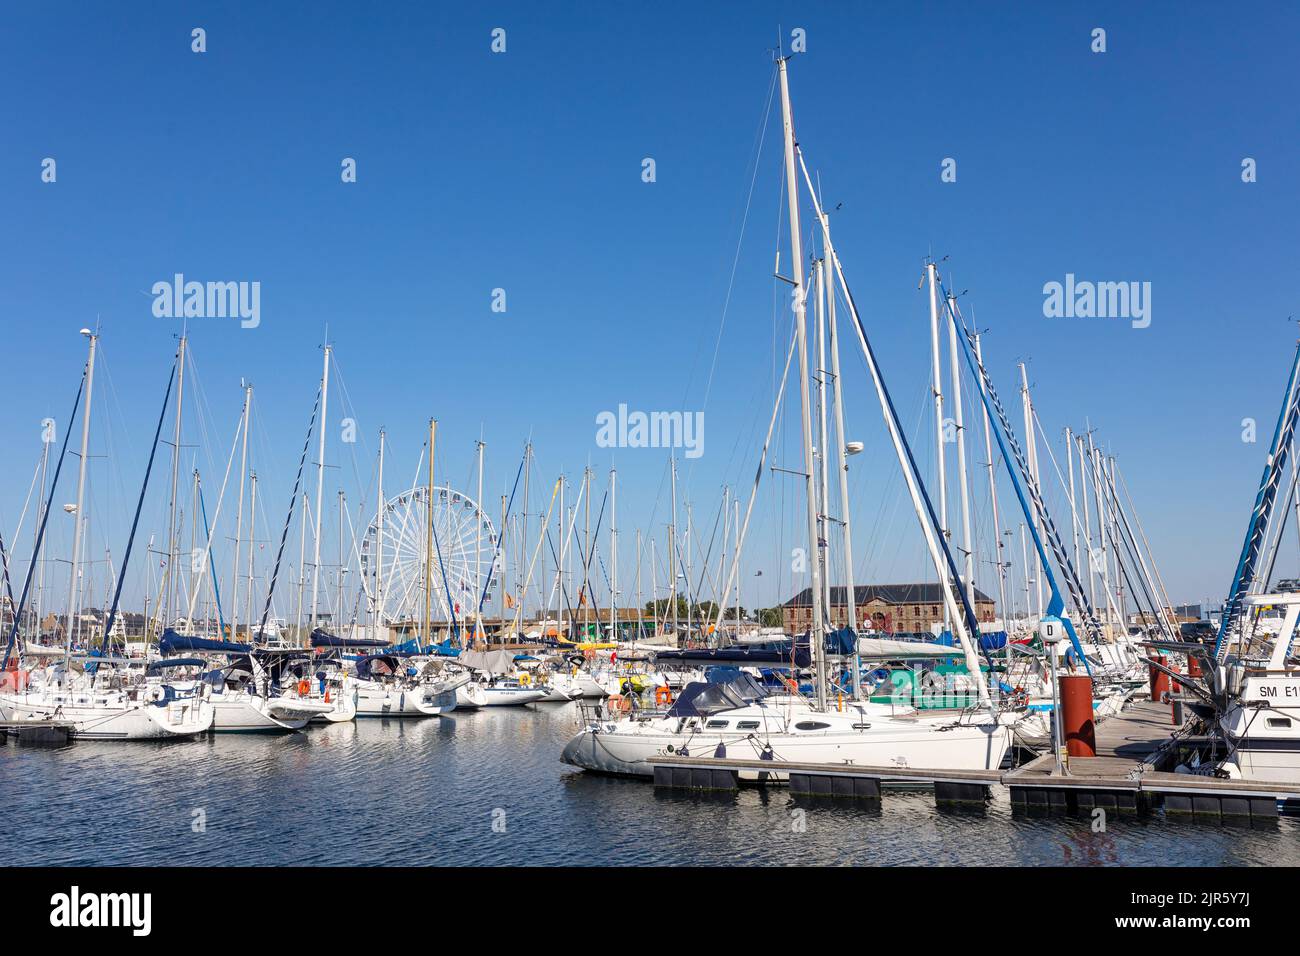 Harbor of Saint-Malo with yachts and sail ships Stock Photo